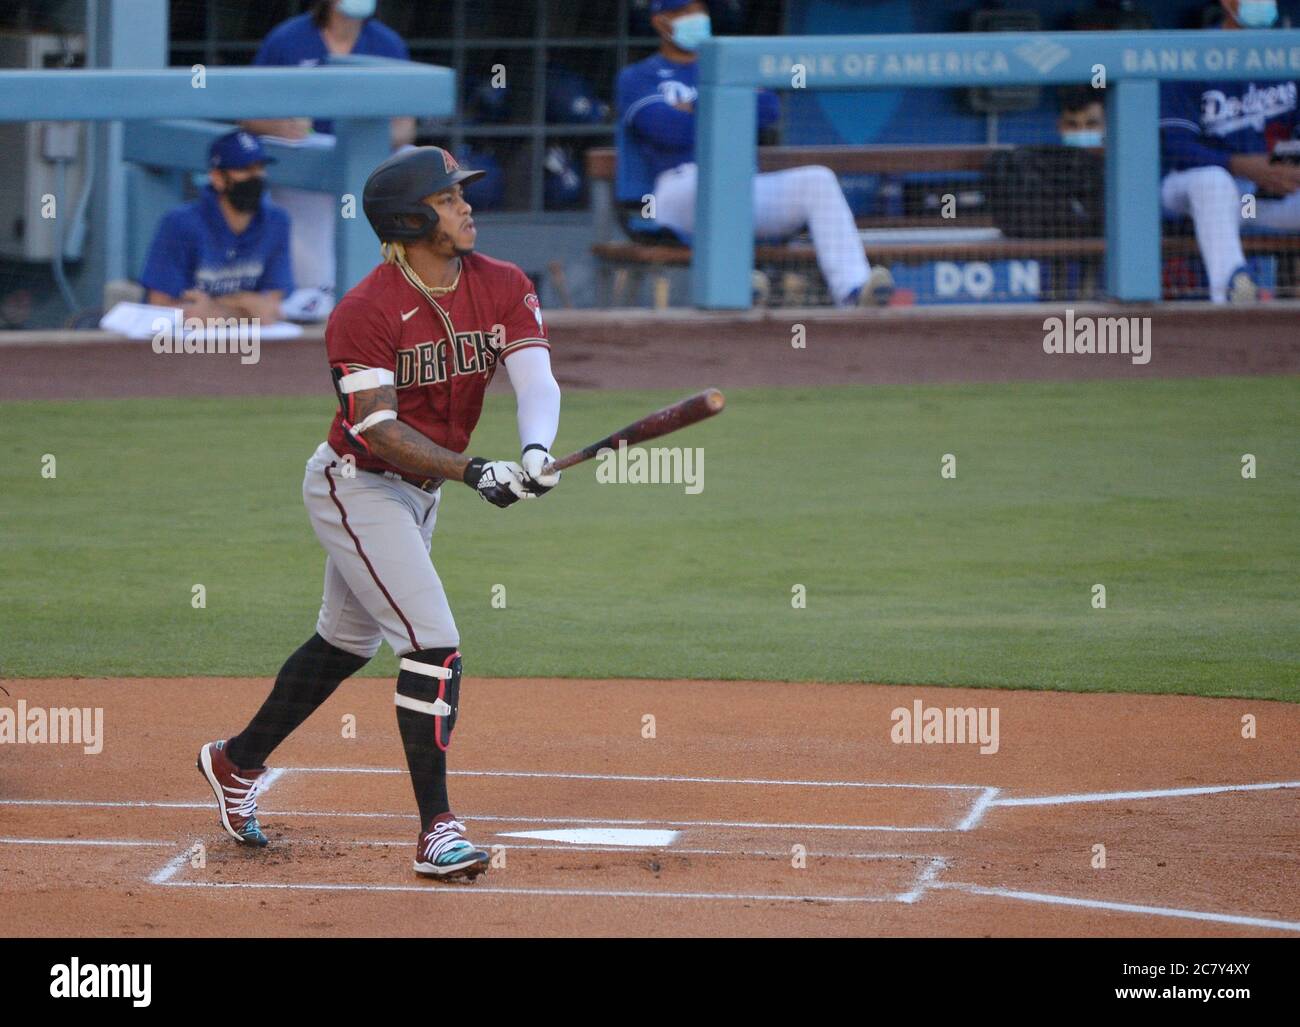 https://c8.alamy.com/comp/2C7Y4XY/los-angeles-united-states-20th-july-2020-arizona-diamondbacks-ketel-marte-connects-with-a-solo-home-run-in-the-first-inning-off-los-angeles-dodgers-rookie-starting-pitcher-mitch-white-at-dodger-stadium-in-los-angeles-on-sunday-july-19-2020-major-league-baseball-is-starting-their-2020-season-after-the-covid-19-pandemic-caused-months-of-delays-photo-by-jim-ruymenupi-credit-upialamy-live-news-2C7Y4XY.jpg